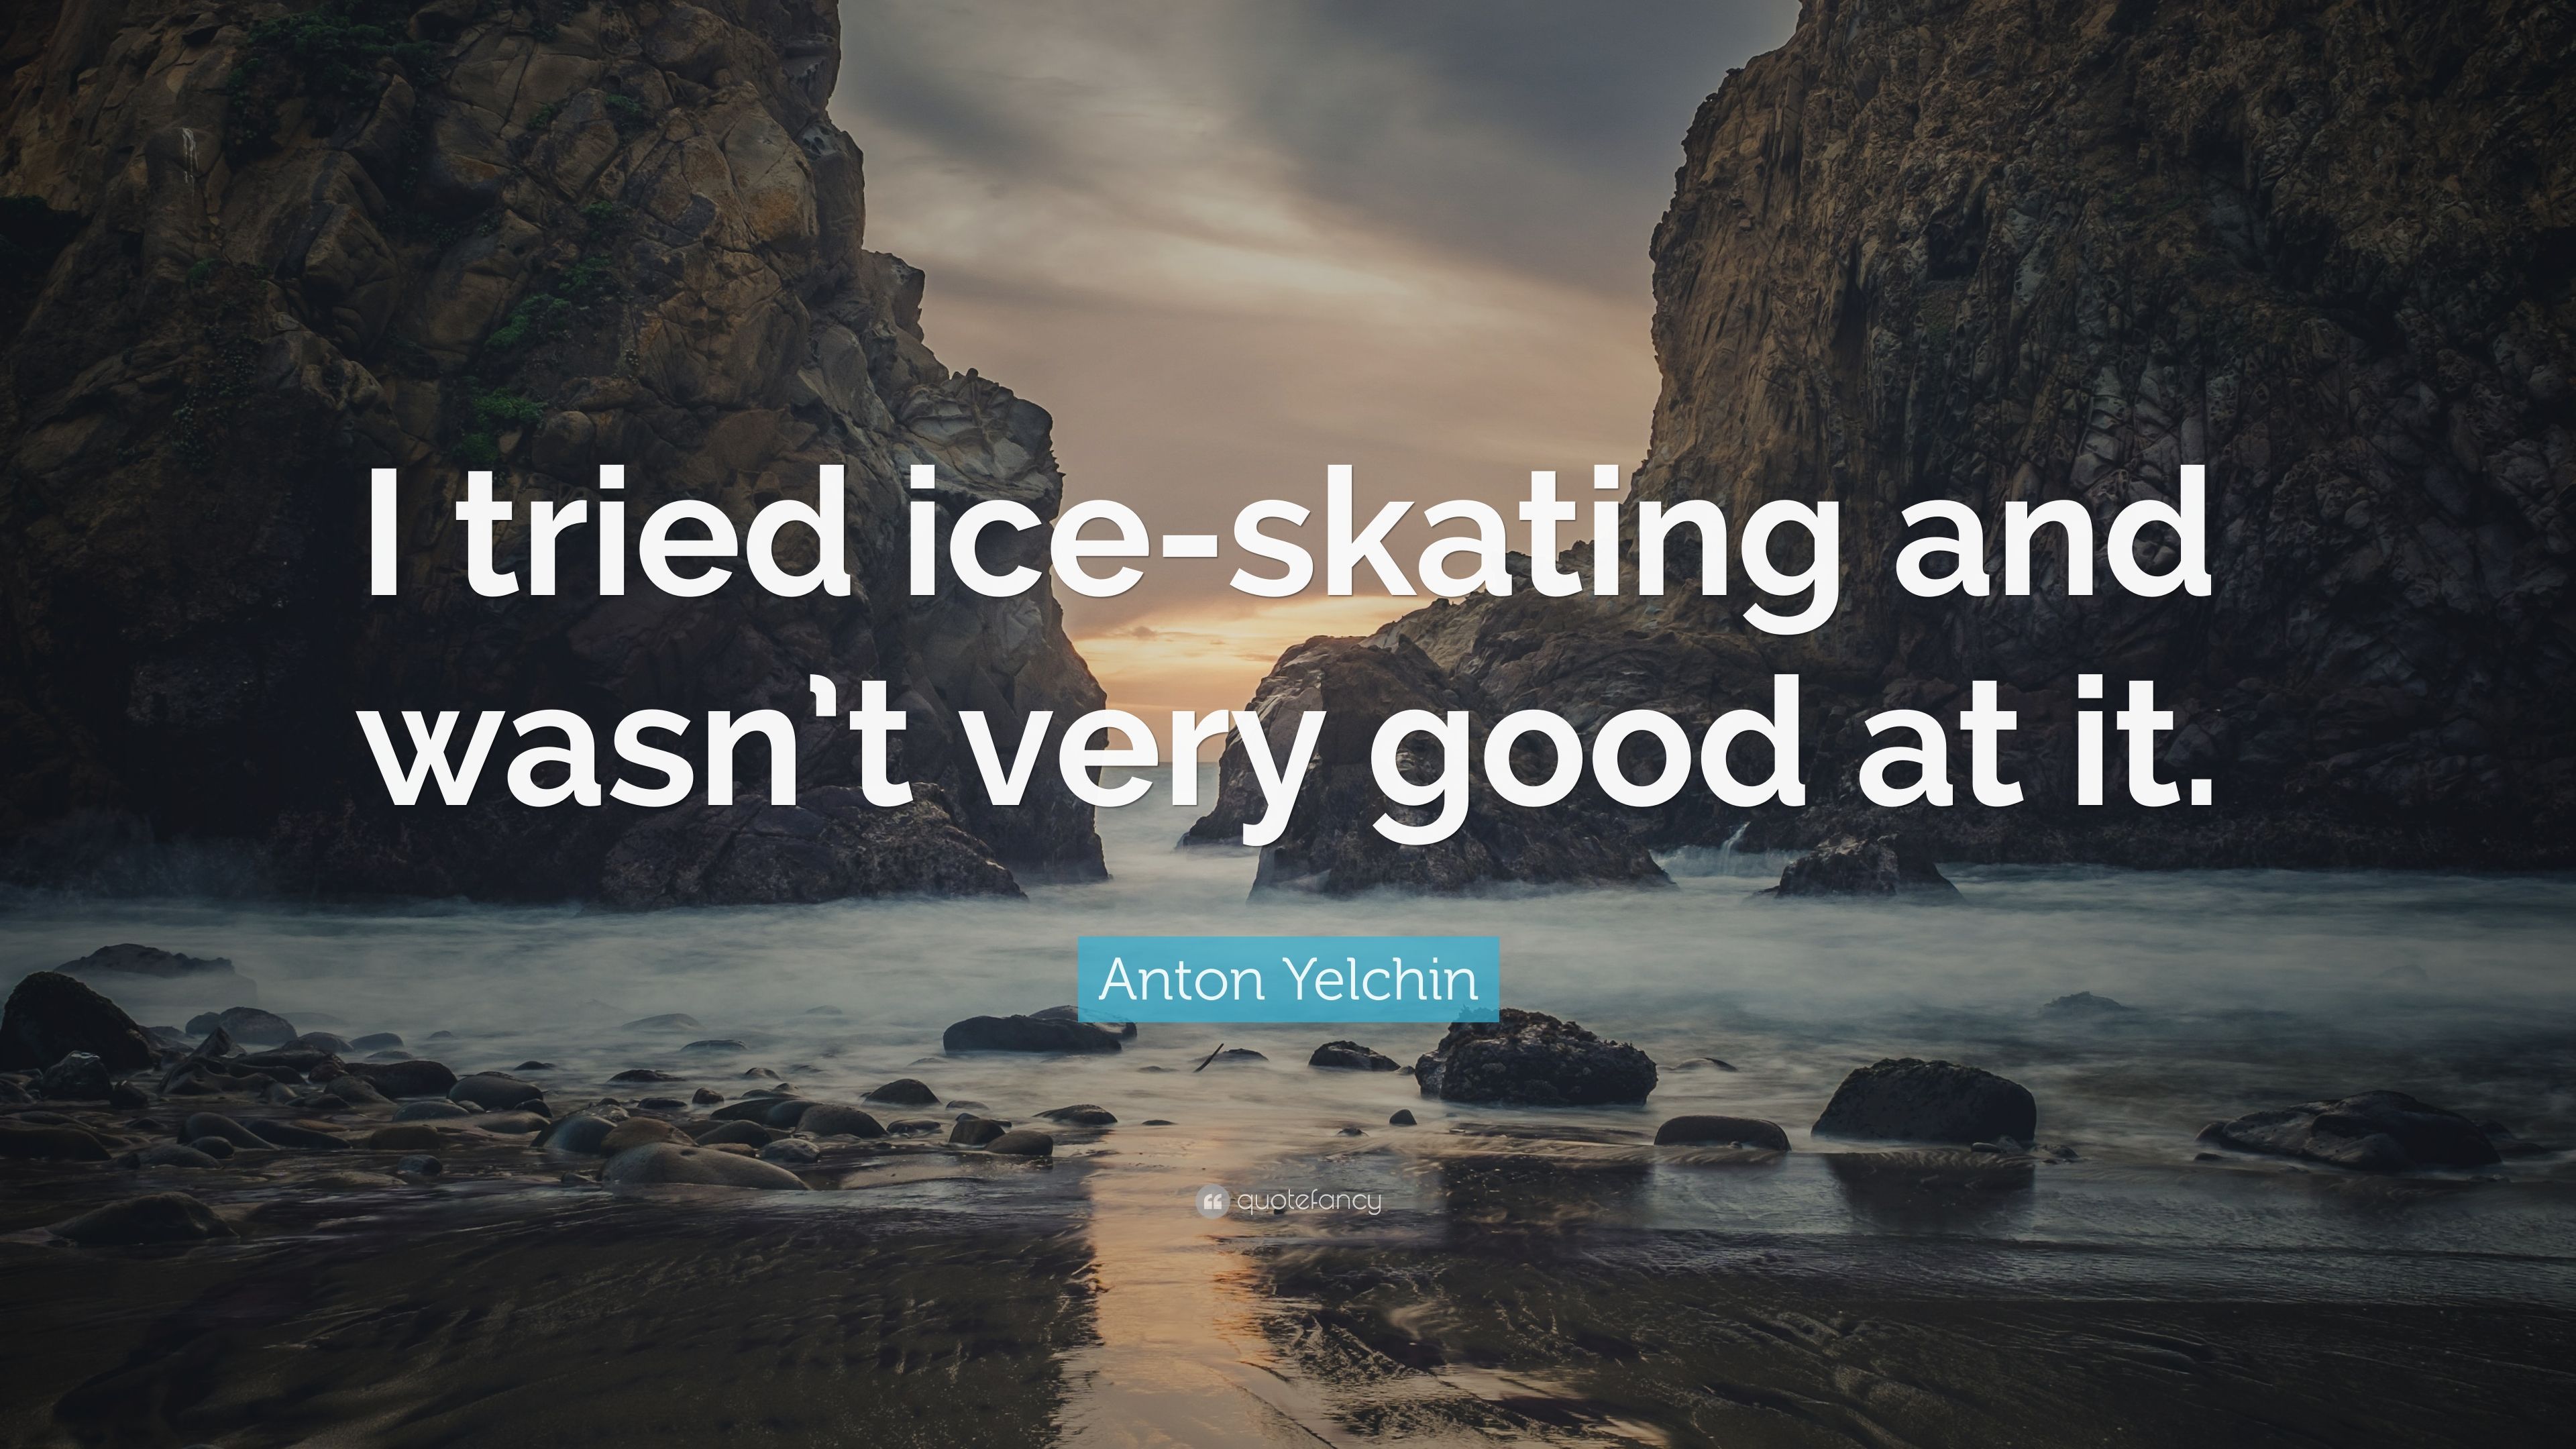 Anton Yelchin Quote: “I Tried Ice Skating And Wasn't Very Good At